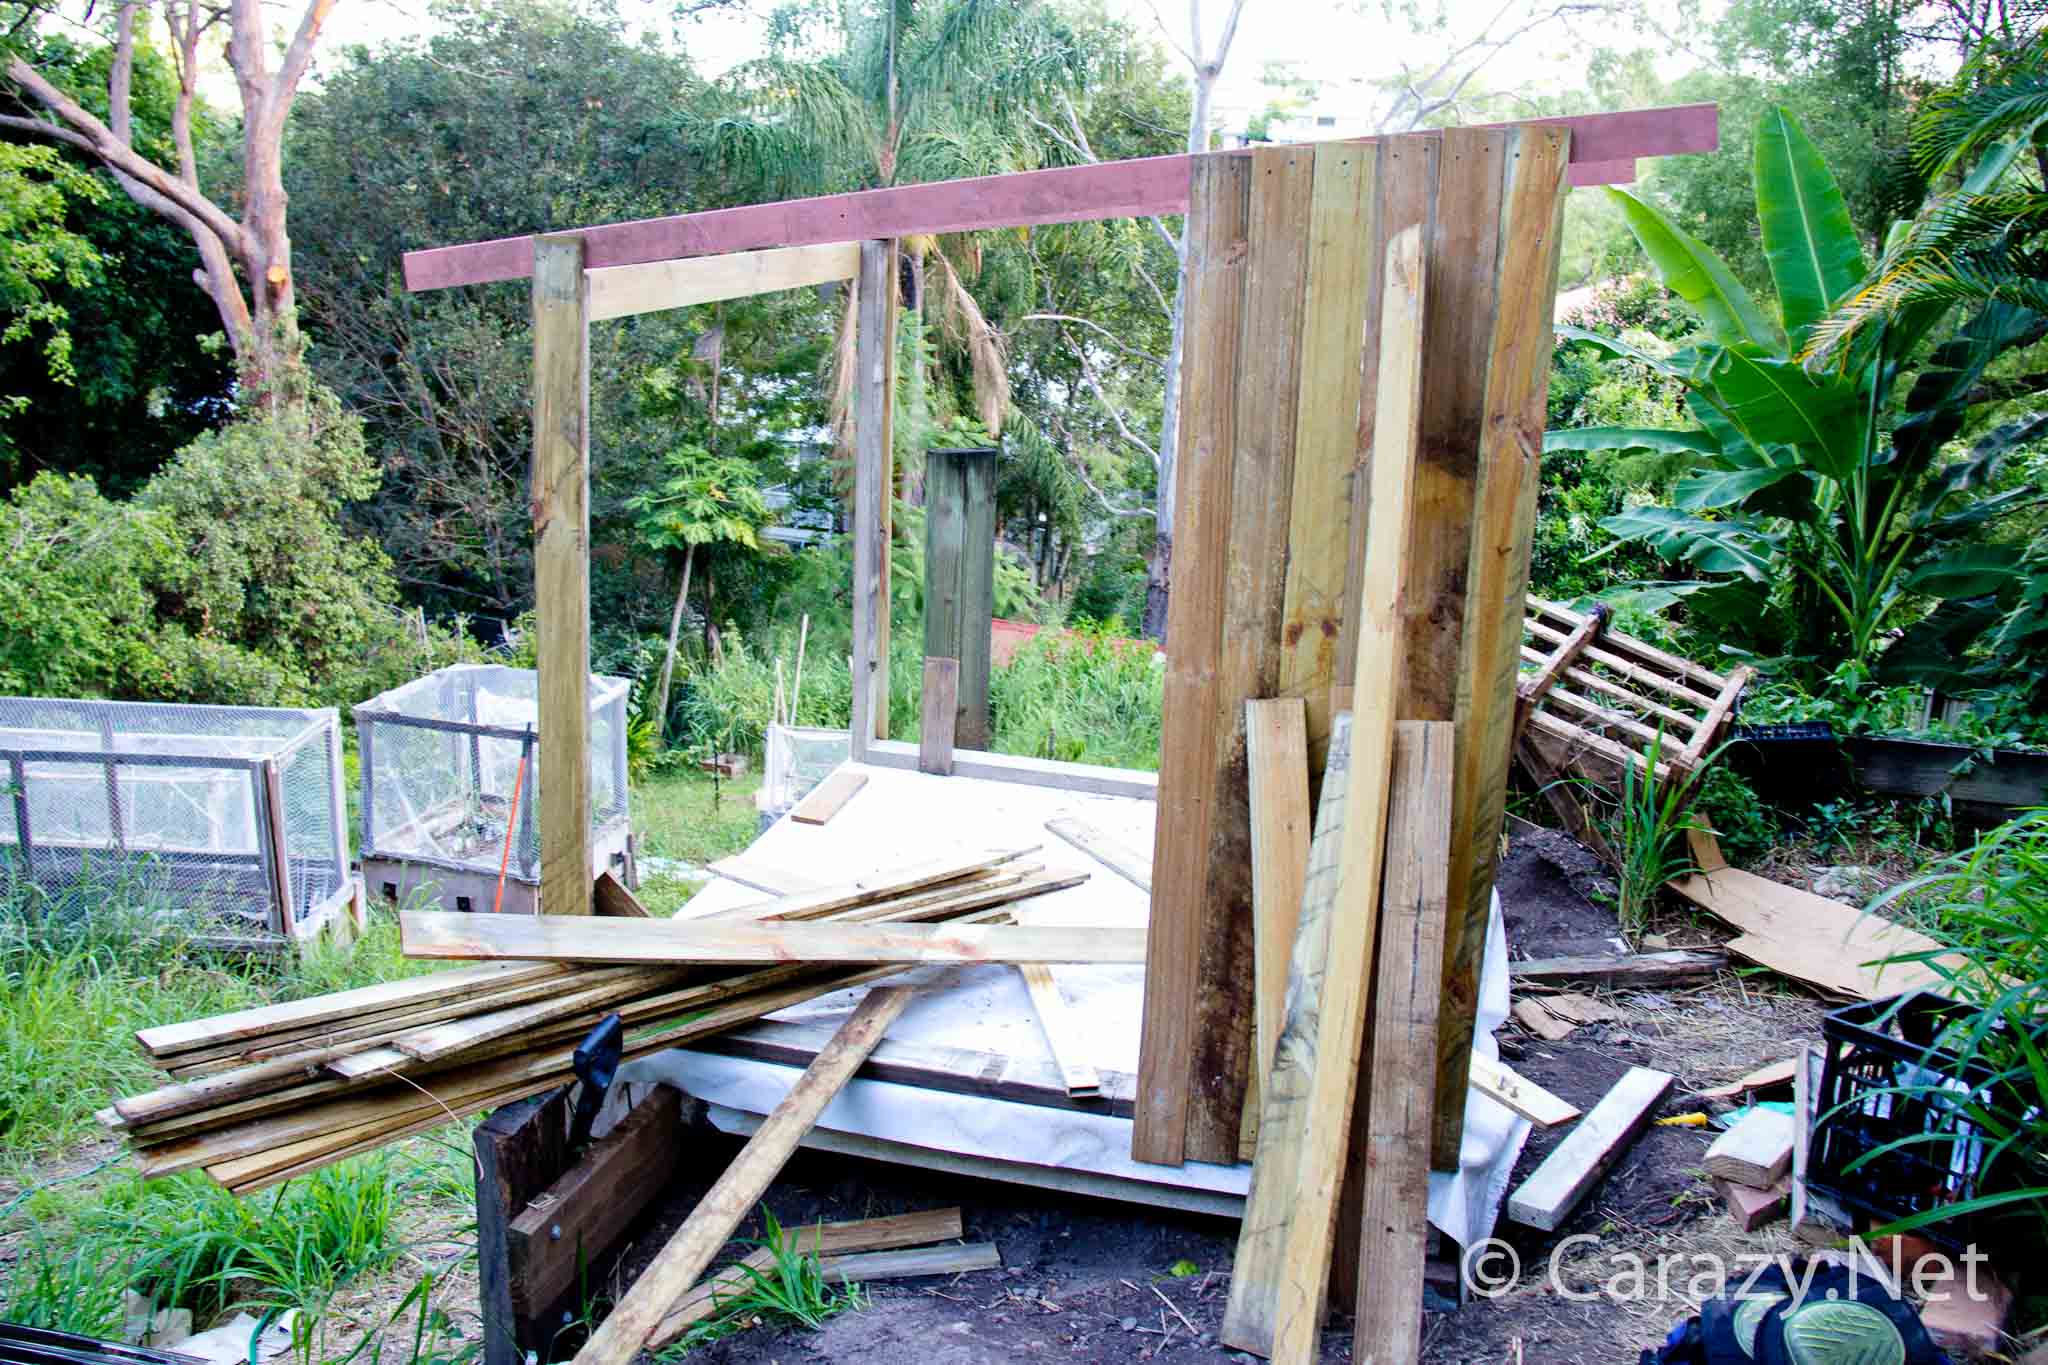 DIY Chicken coop build - Wall framework and side panels